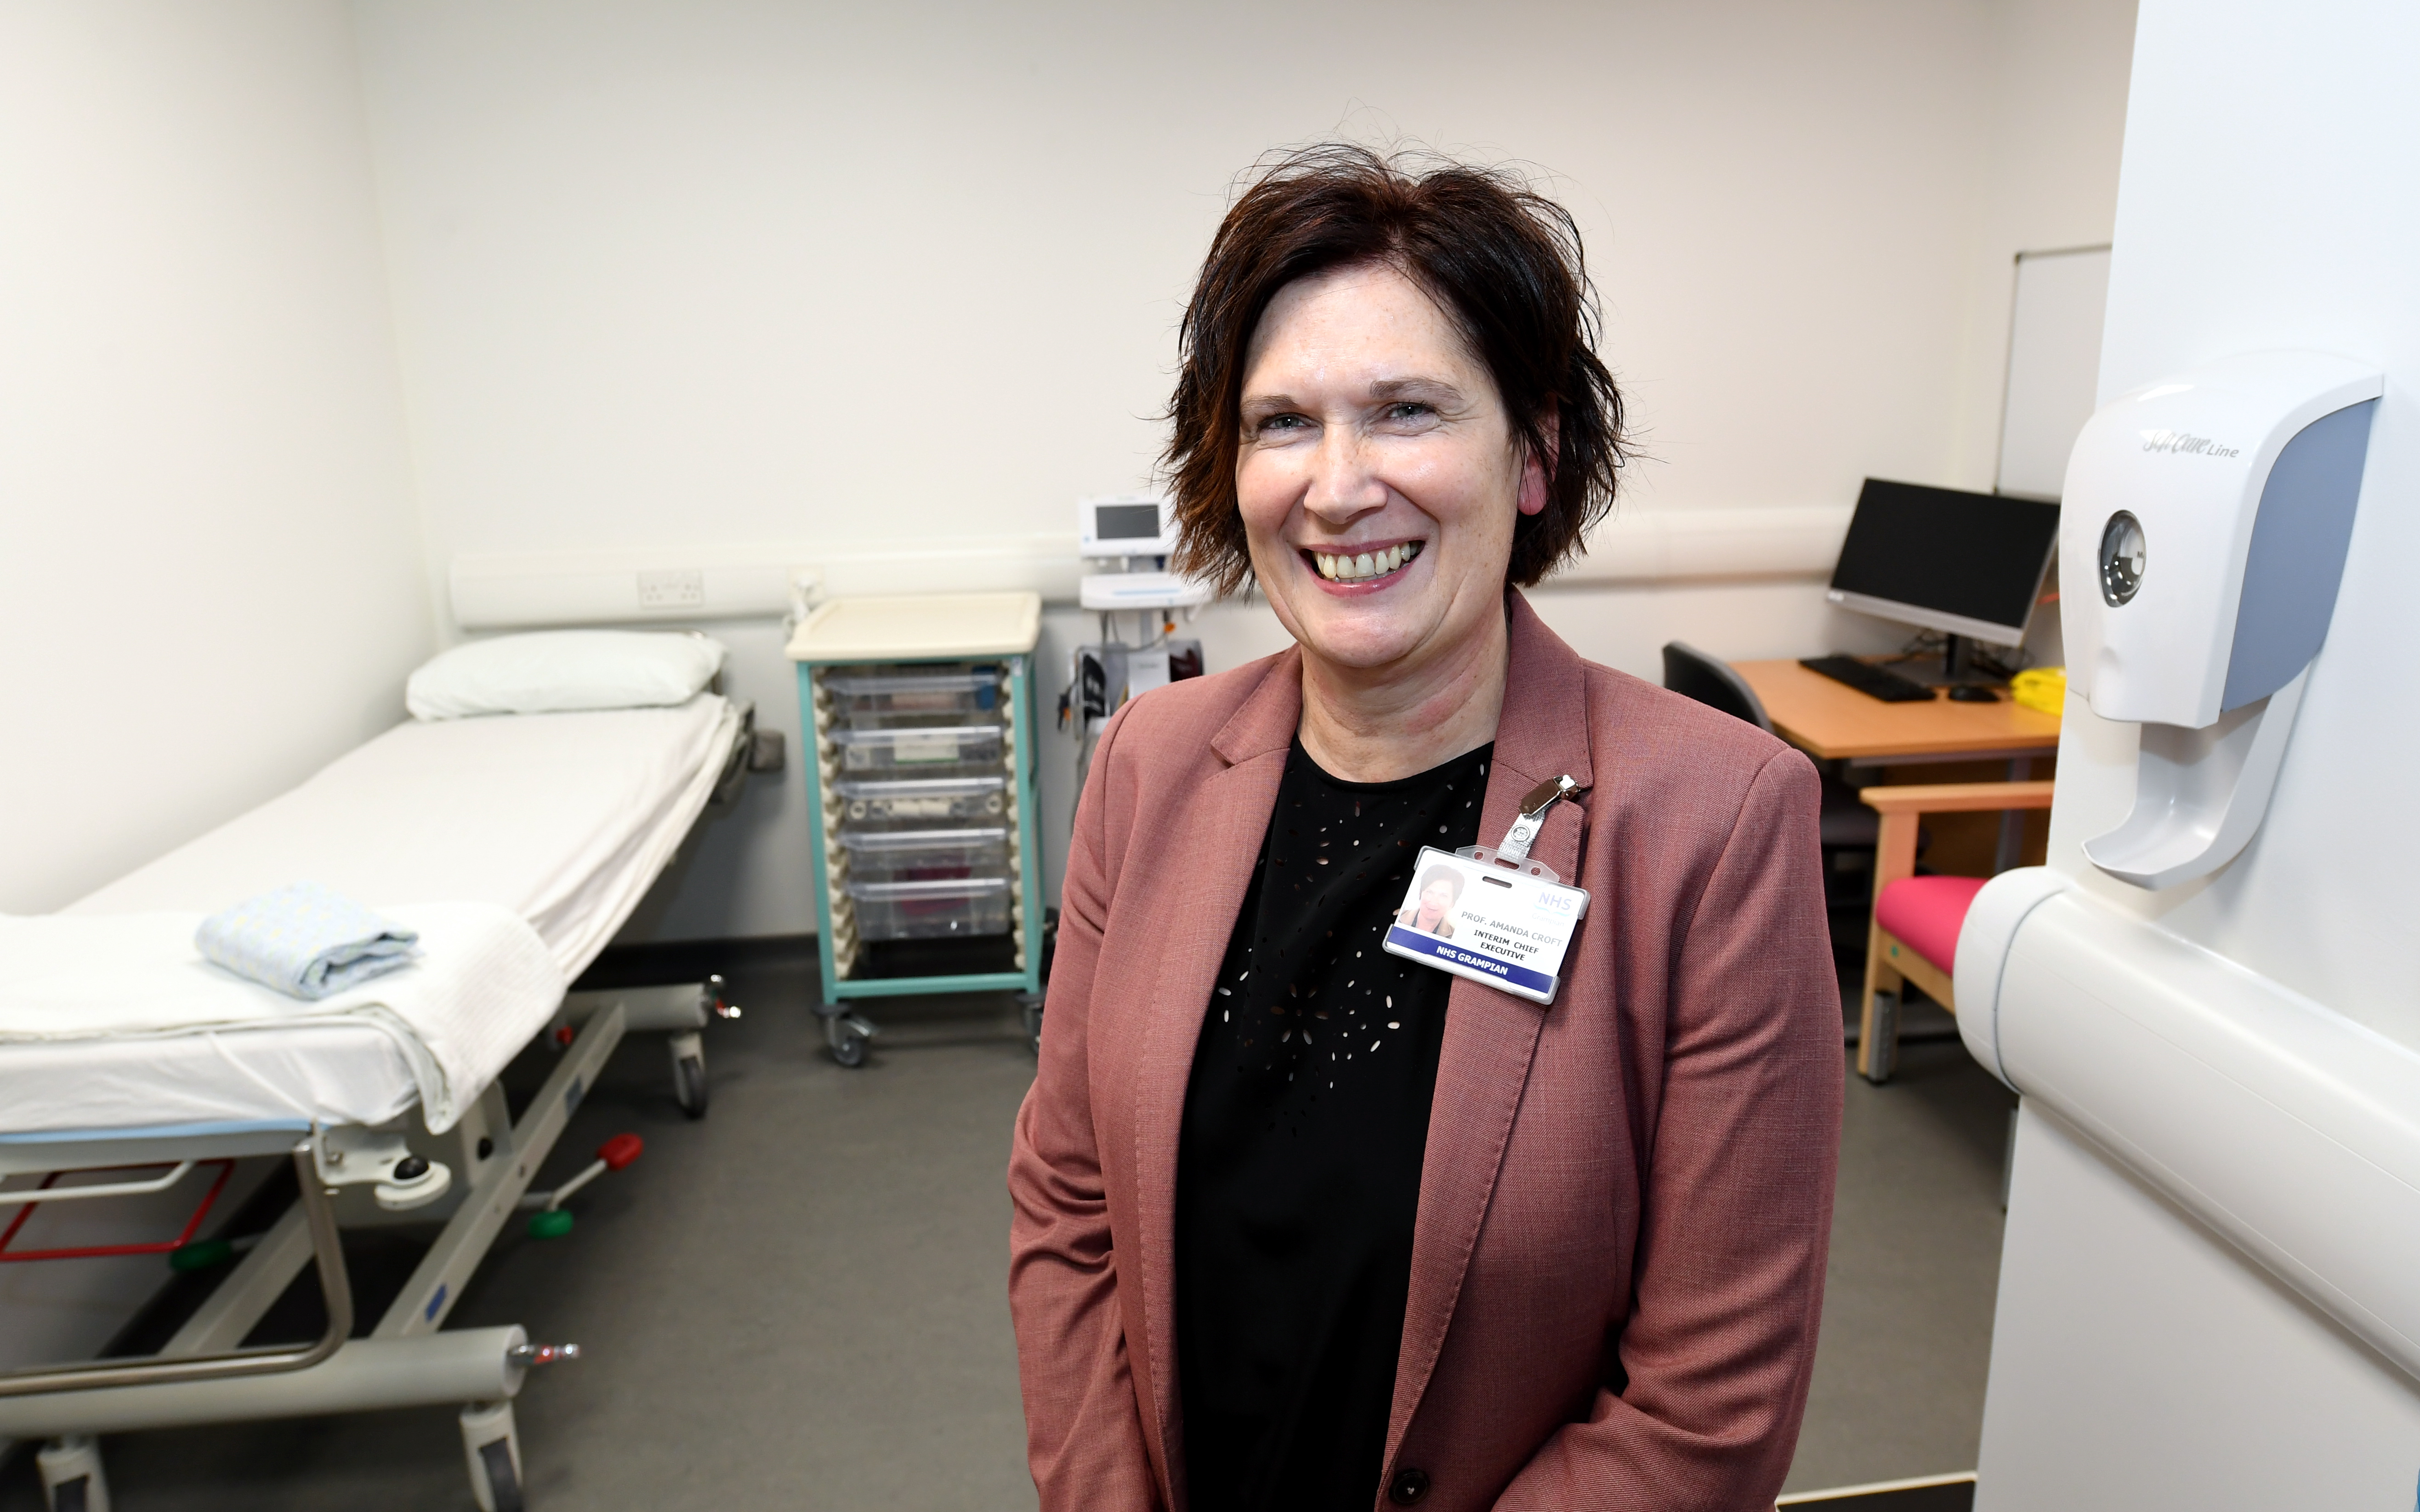 Interim NHS Grampian Chief Executive Prof Amanda Croft, officially opened the new Department of Schedued Admissions at ARI, which will reduce the amount of time people spend at hospital when attending for operations.